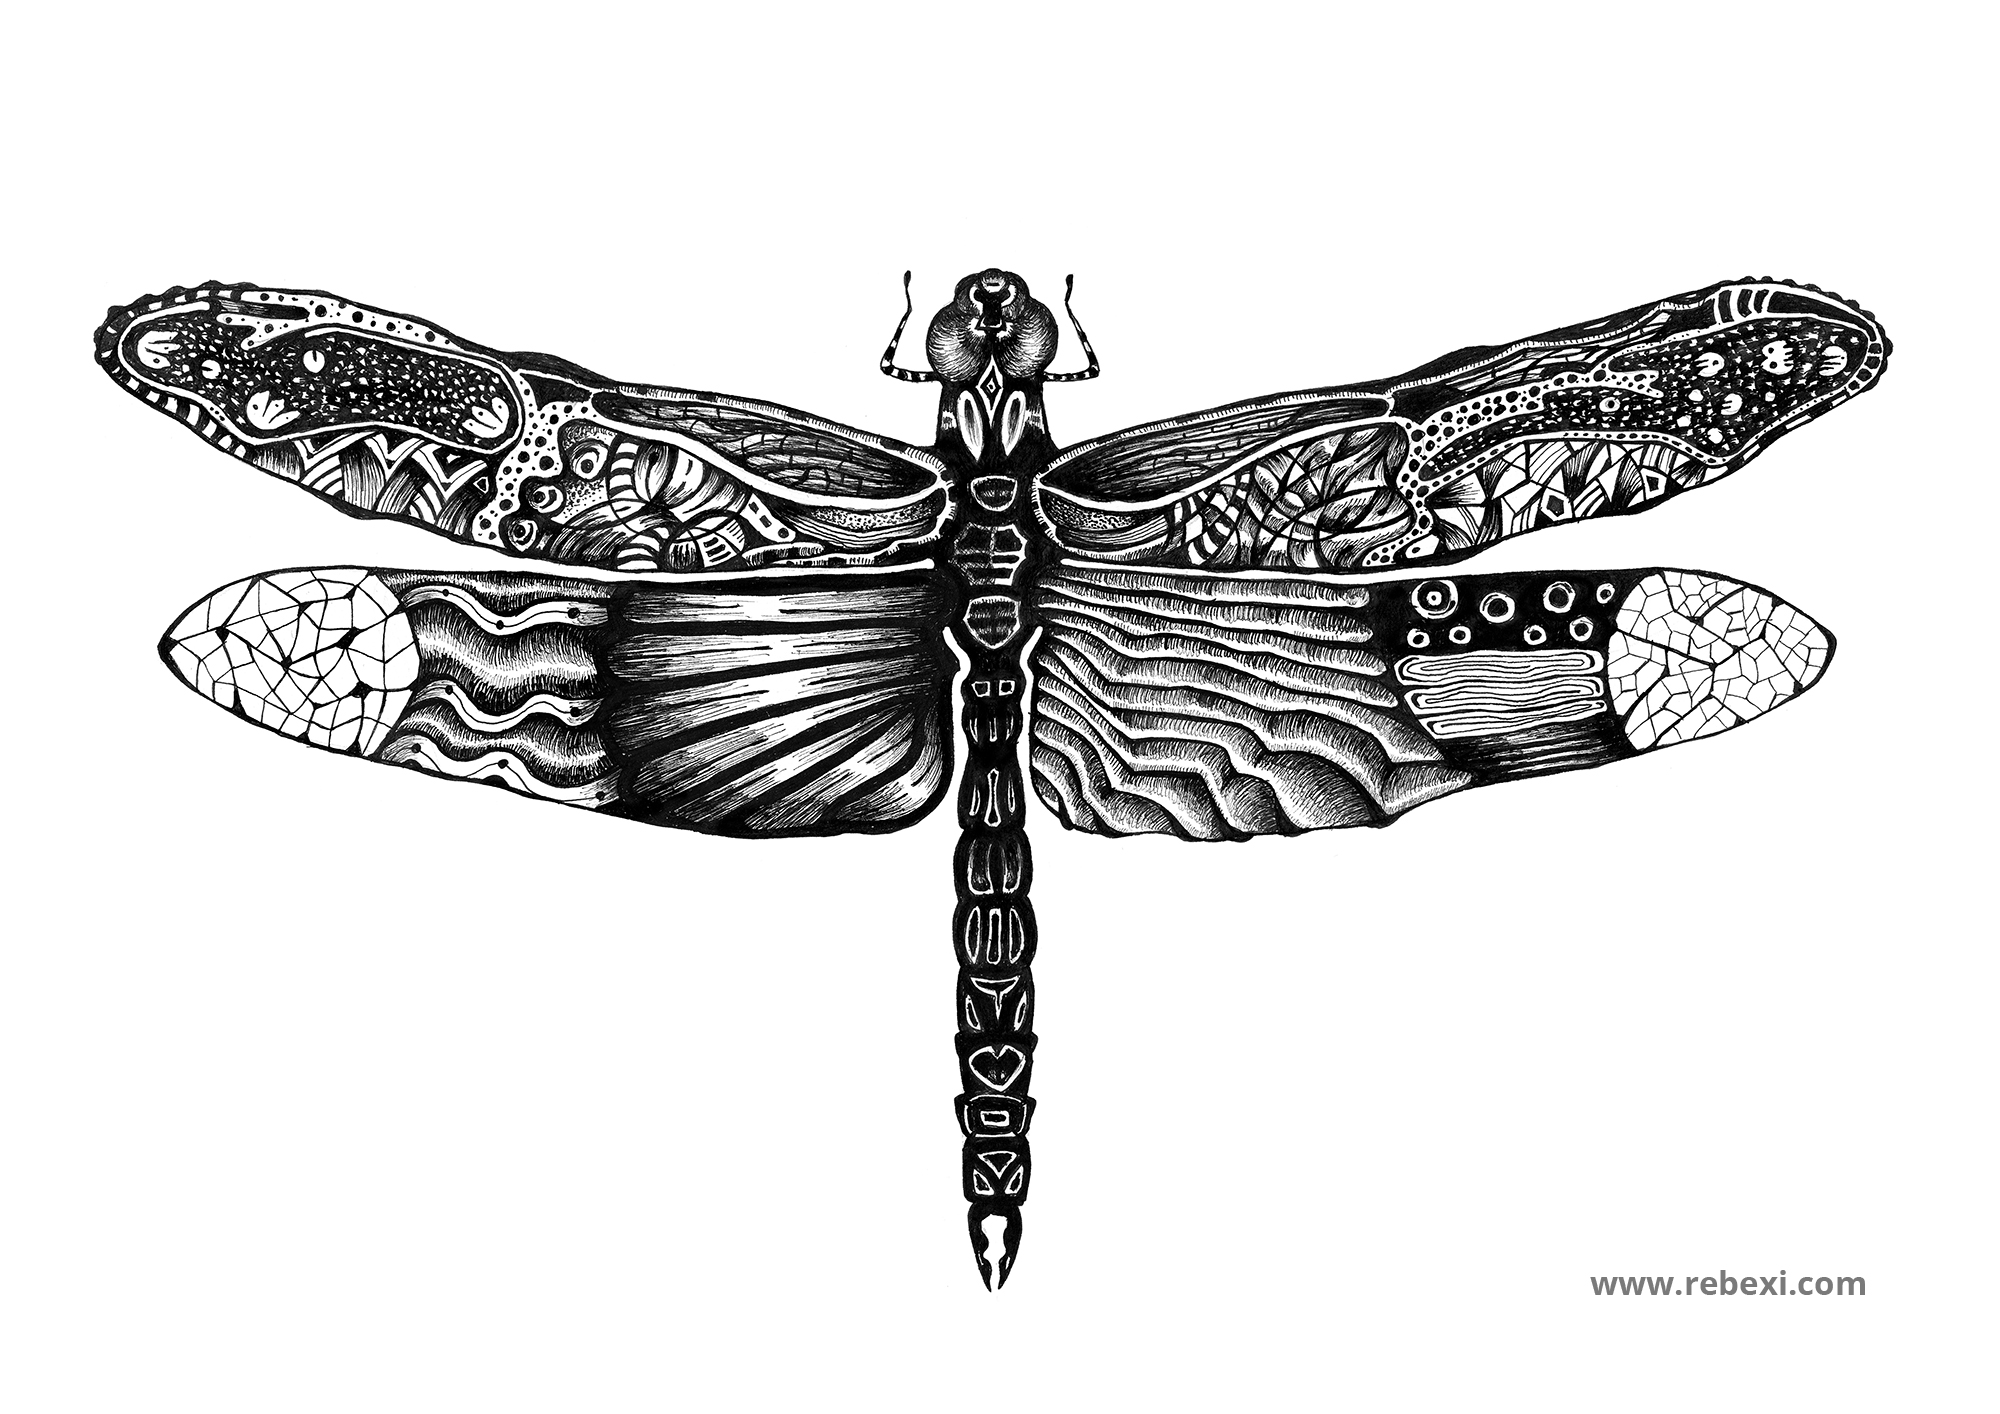 Drawing a Dragonfly - Rebexi